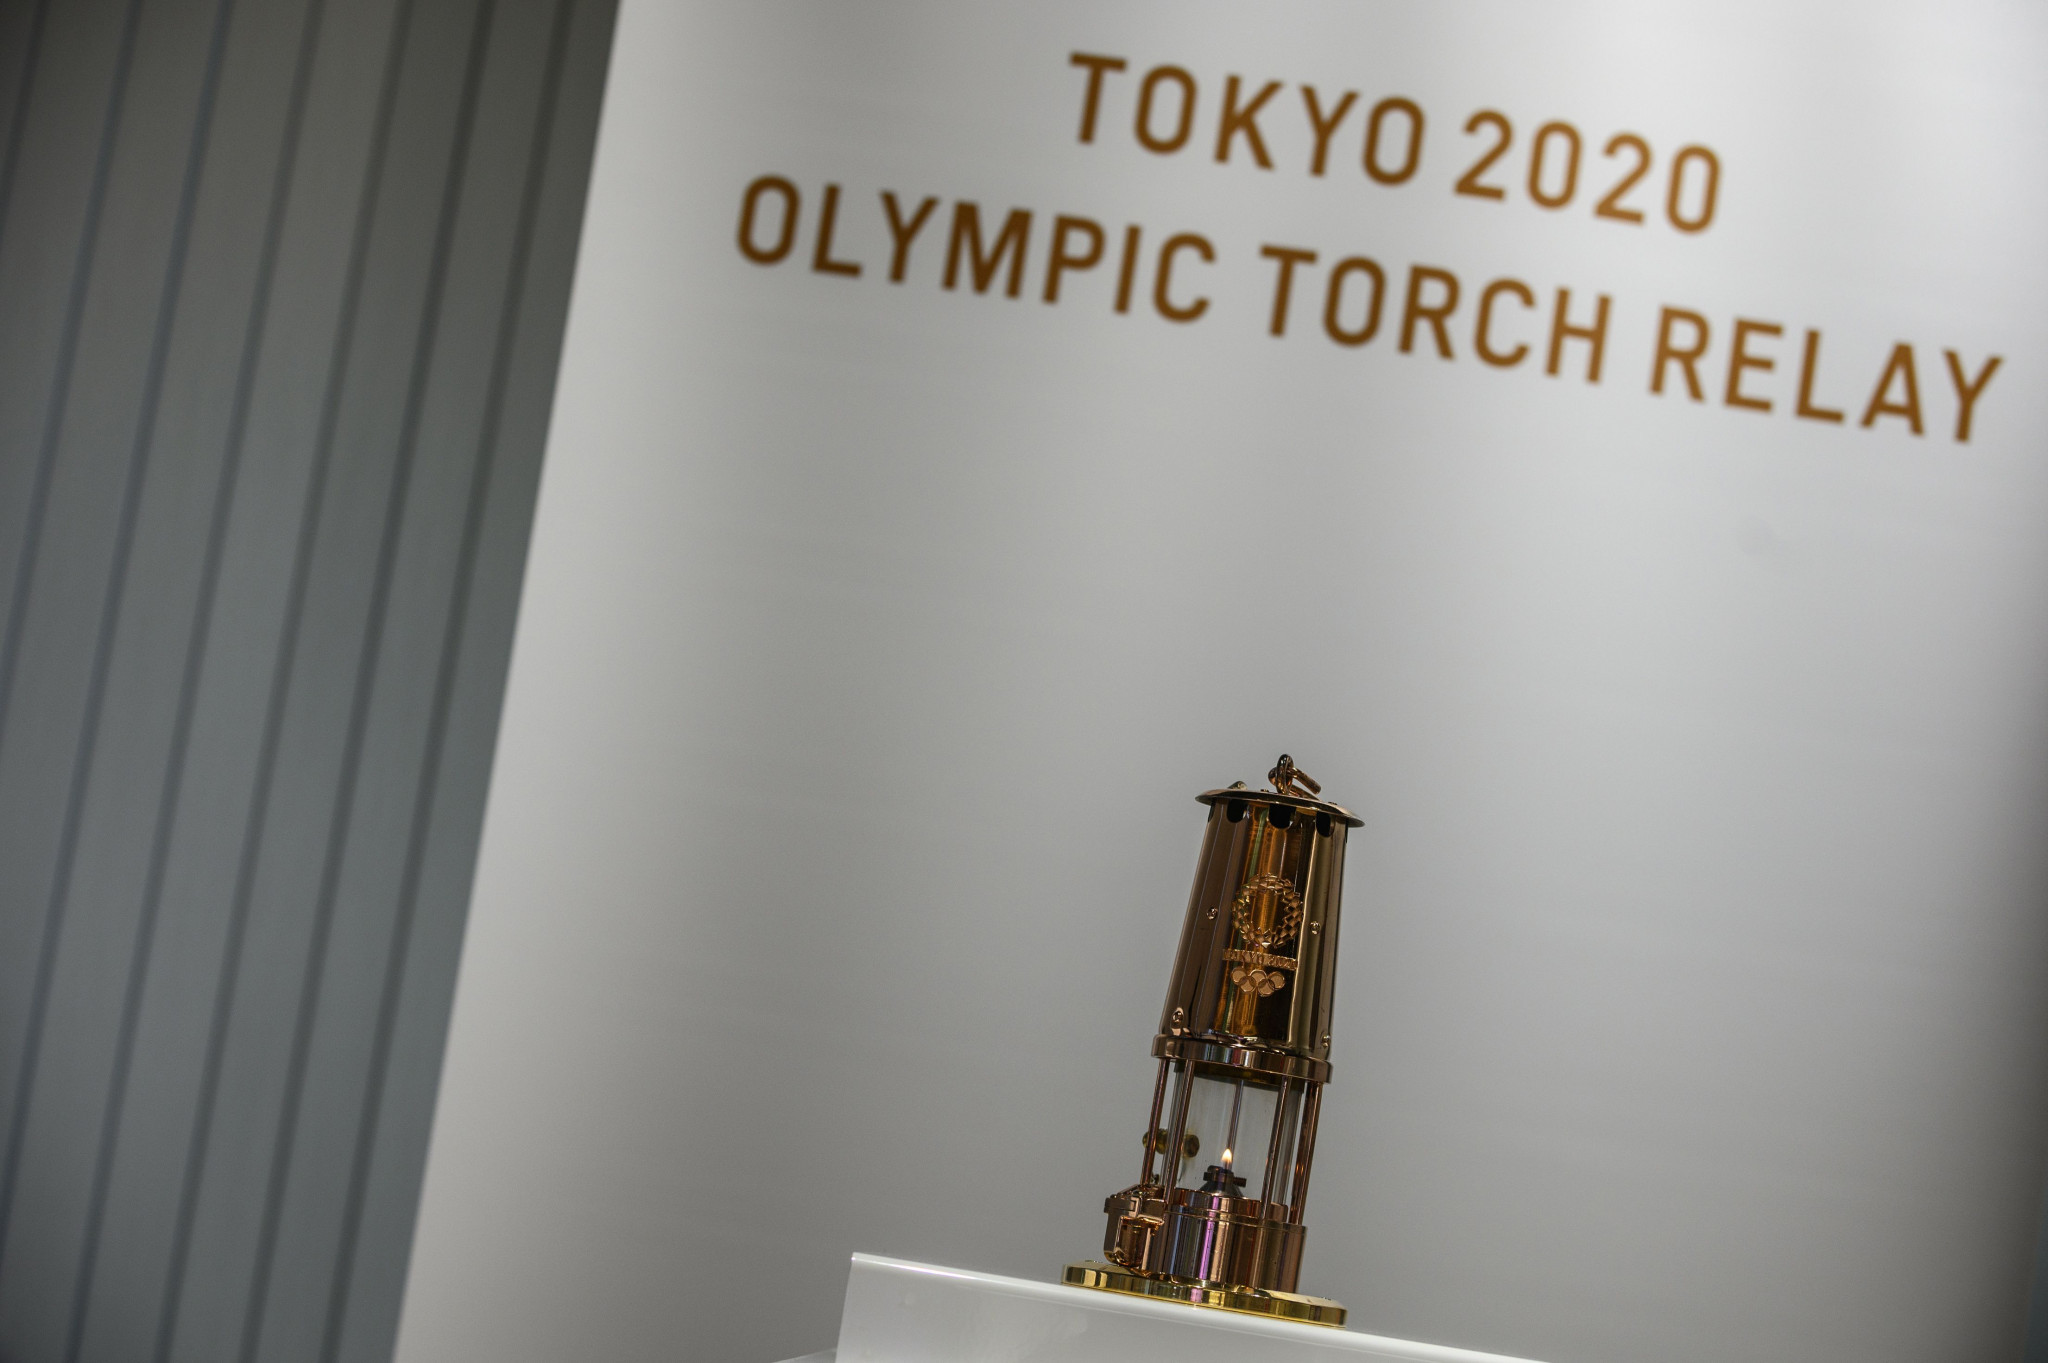 Social distancing and online streaming among plans for postponed Tokyo 2020 Torch Relay with 100 days to go